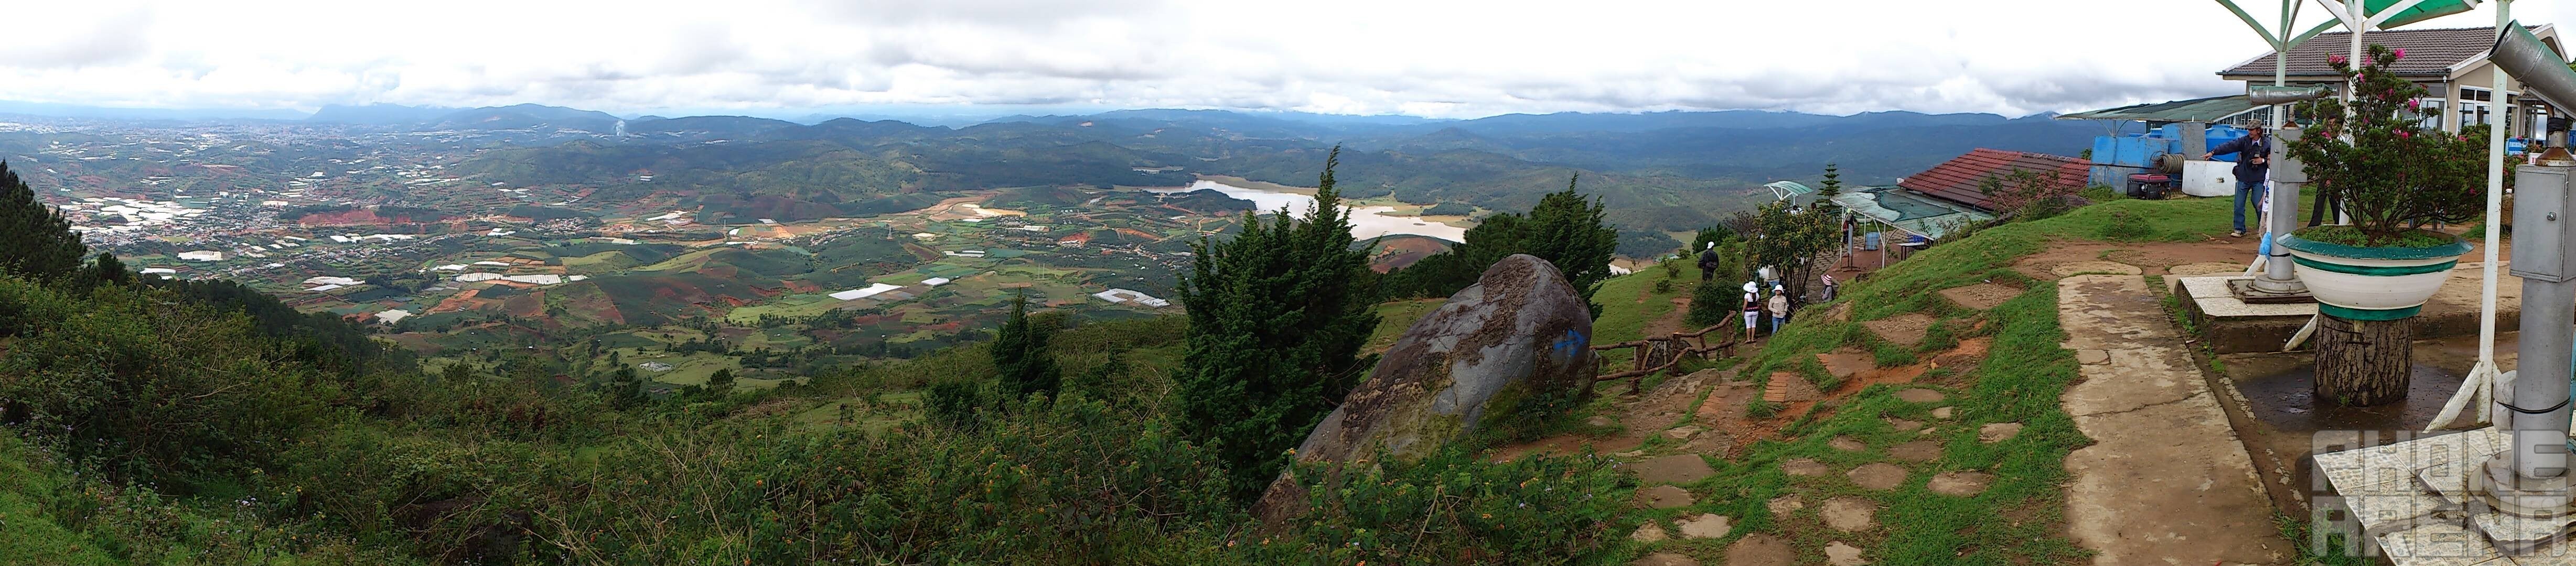 15. maxmedia - Sony Ericsson Xperia neoMountain peaks Langbiang, Dalat City, Vietnam - Cool images, taken with your cell phone #22